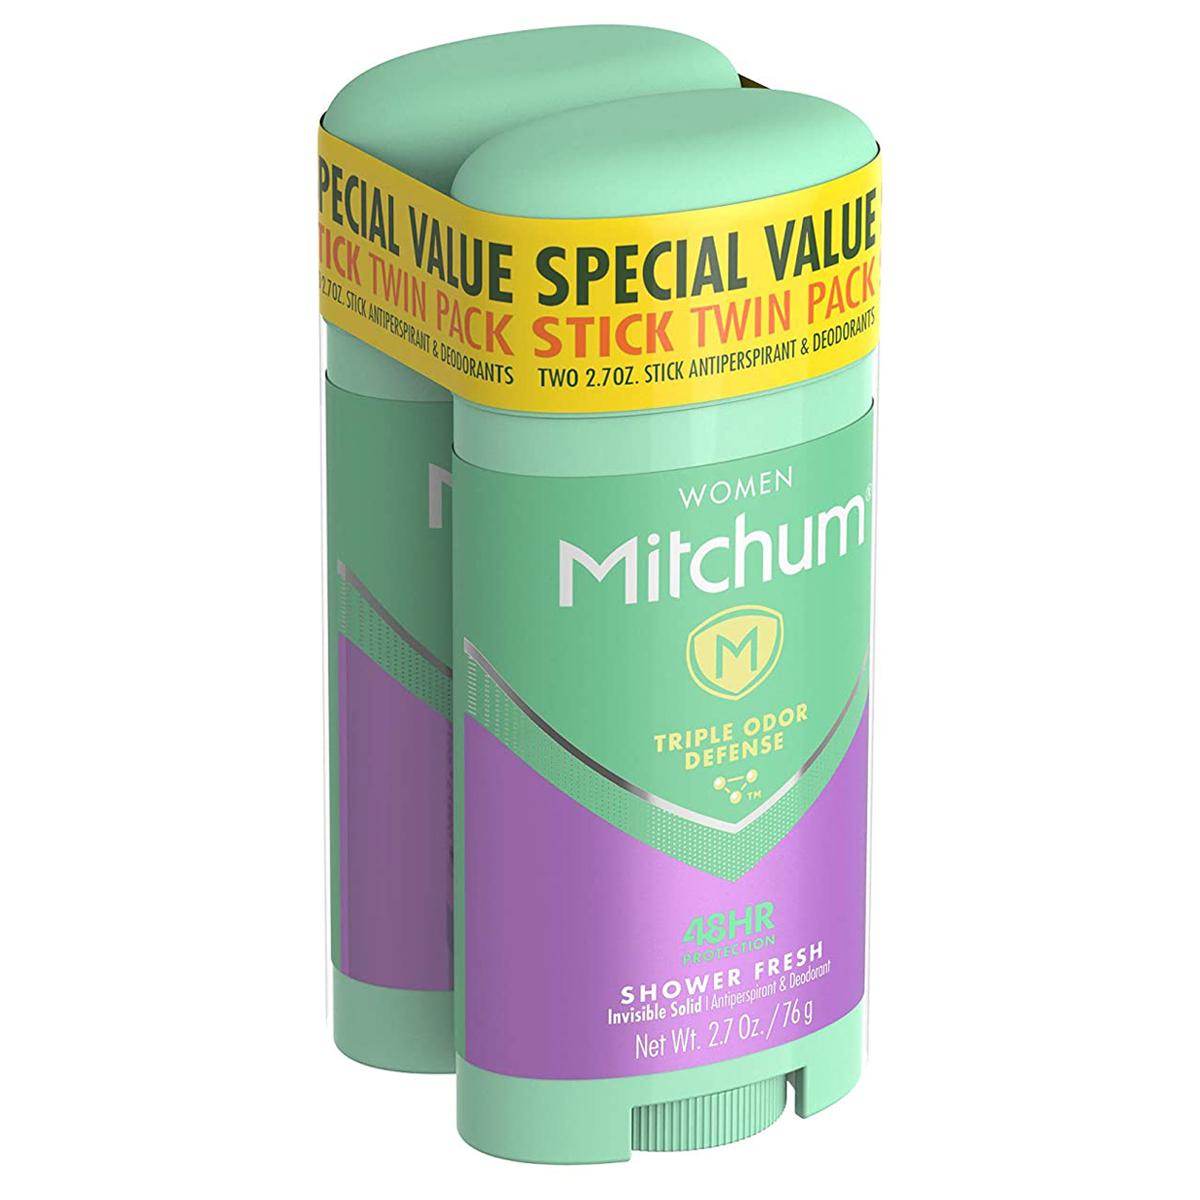 2 Mitchum Antiperspirant Deodorant Stick for Women for $2.66 Shipped